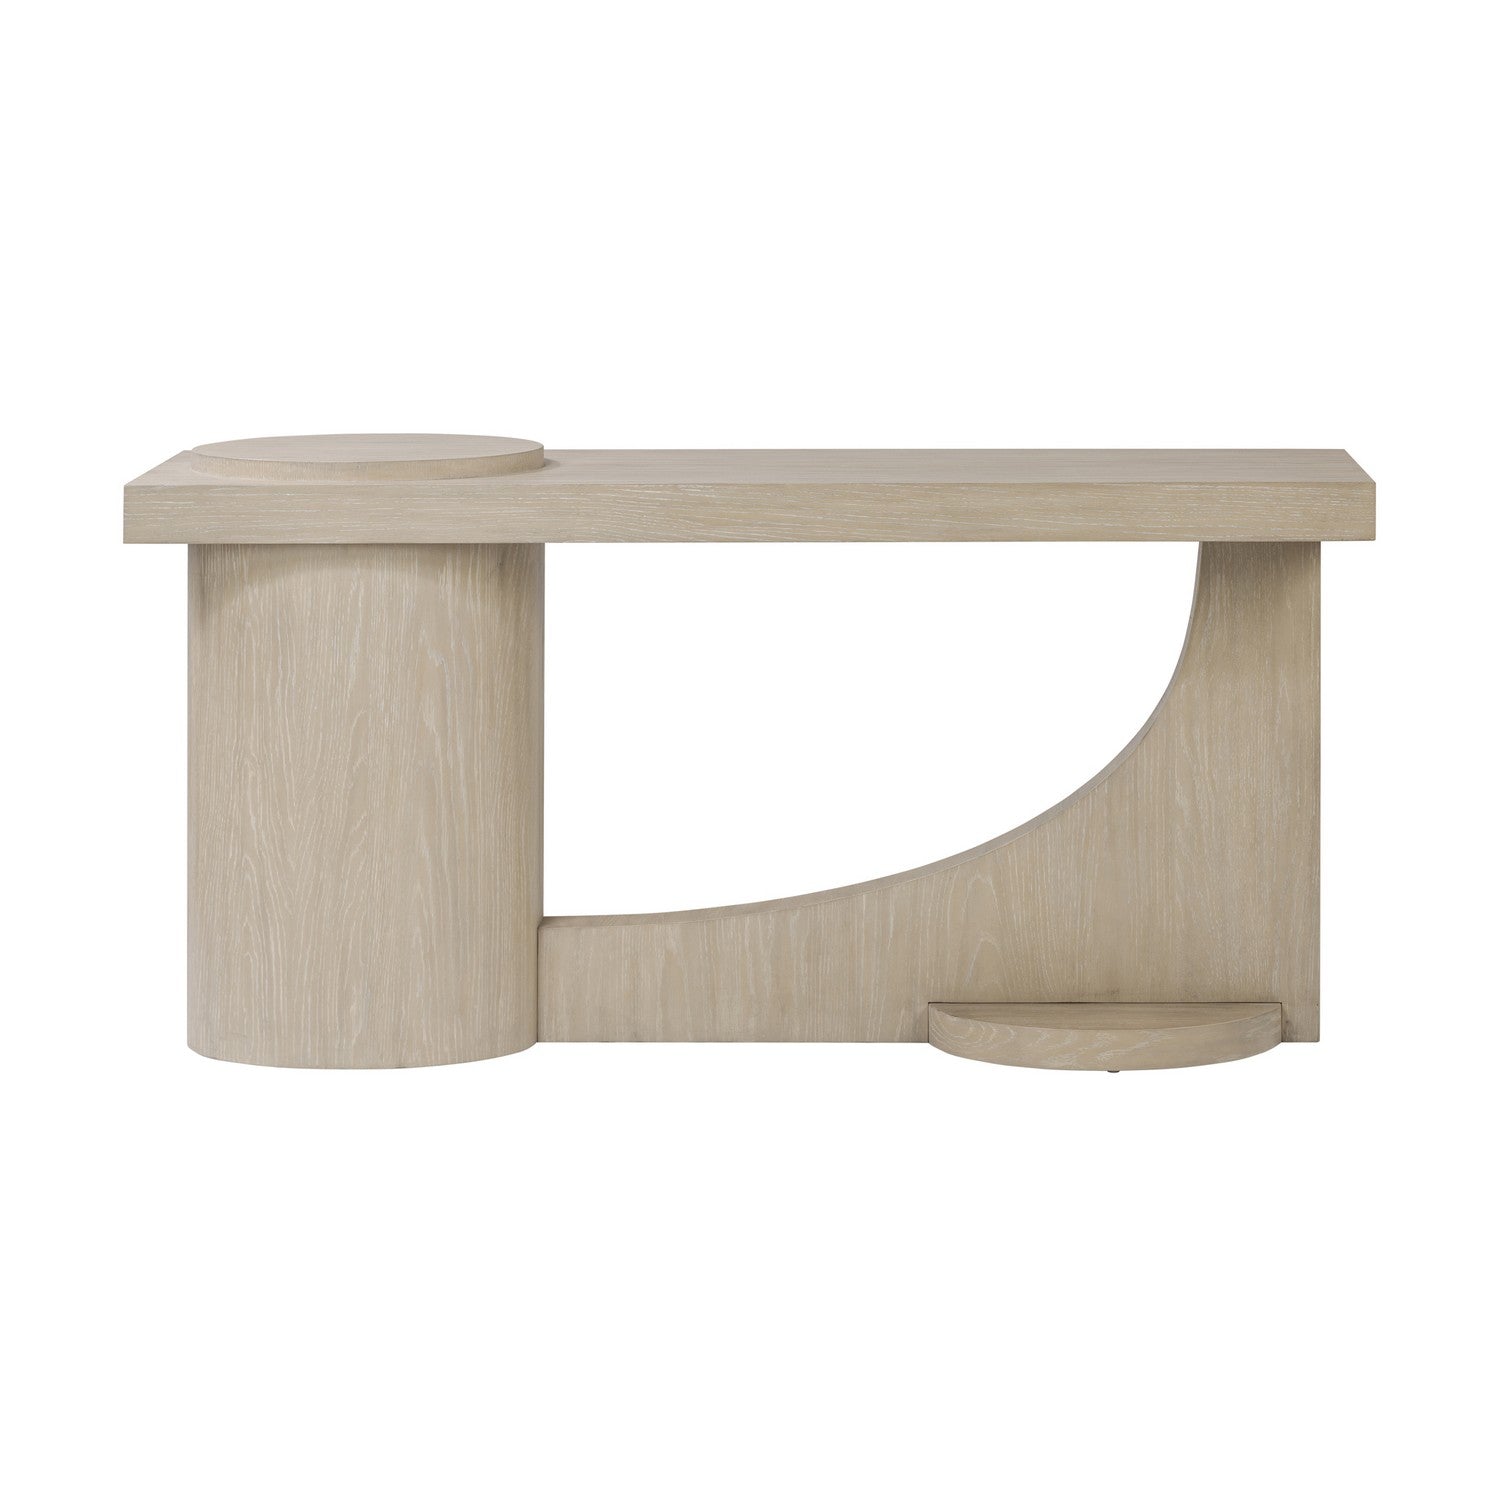 Varaluz - 512TA62A - Console Table - Westwood - Ash Blonde